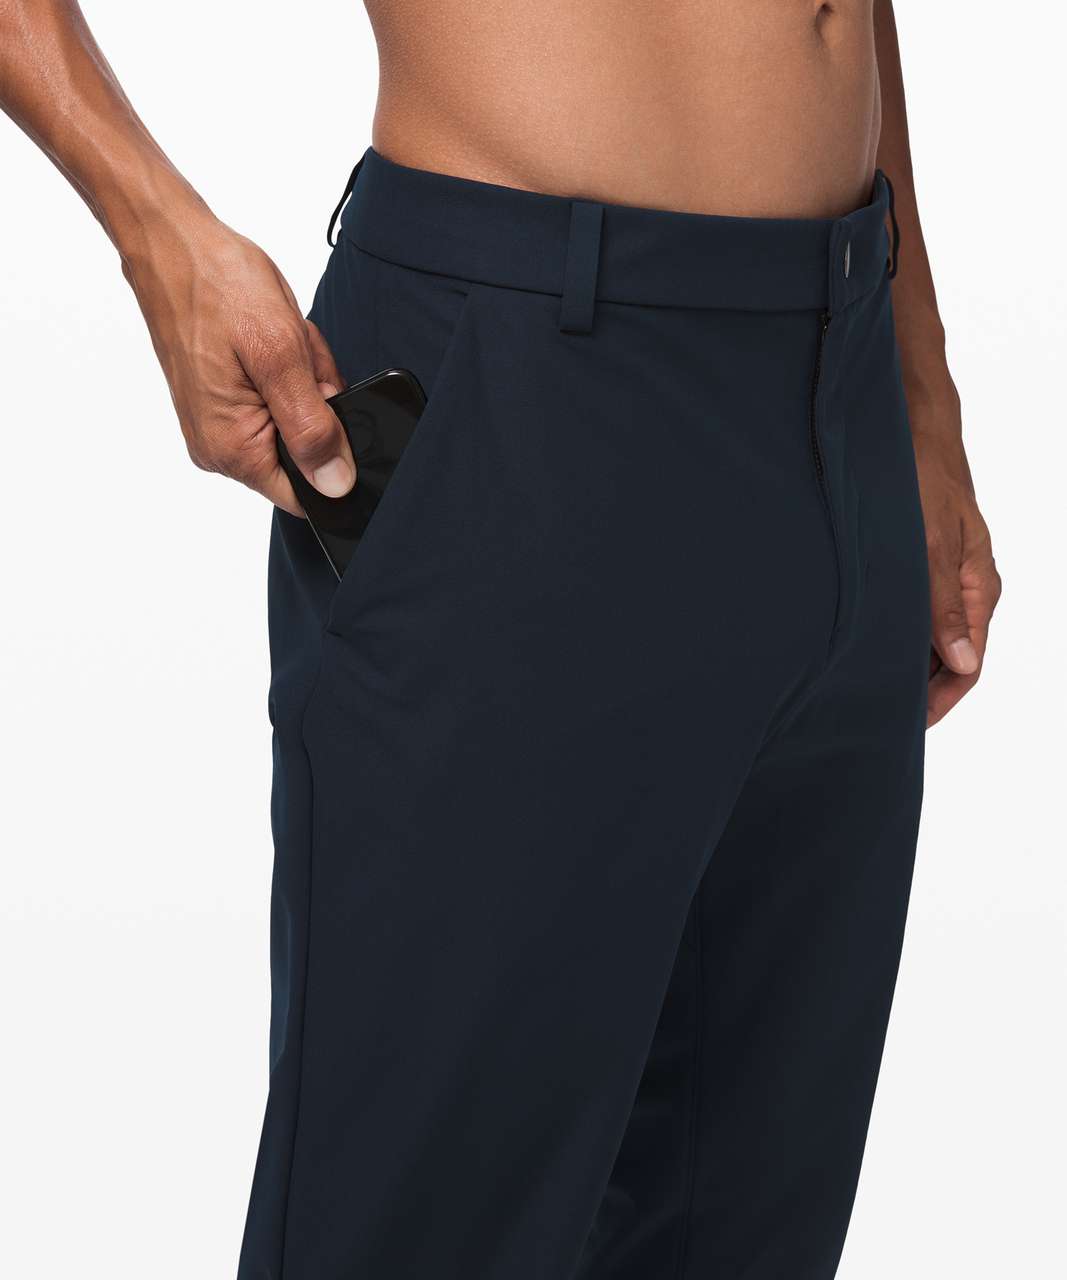 Lululemon Commission Pant Classic *Warpstreme 34" - True Navy (First Release)